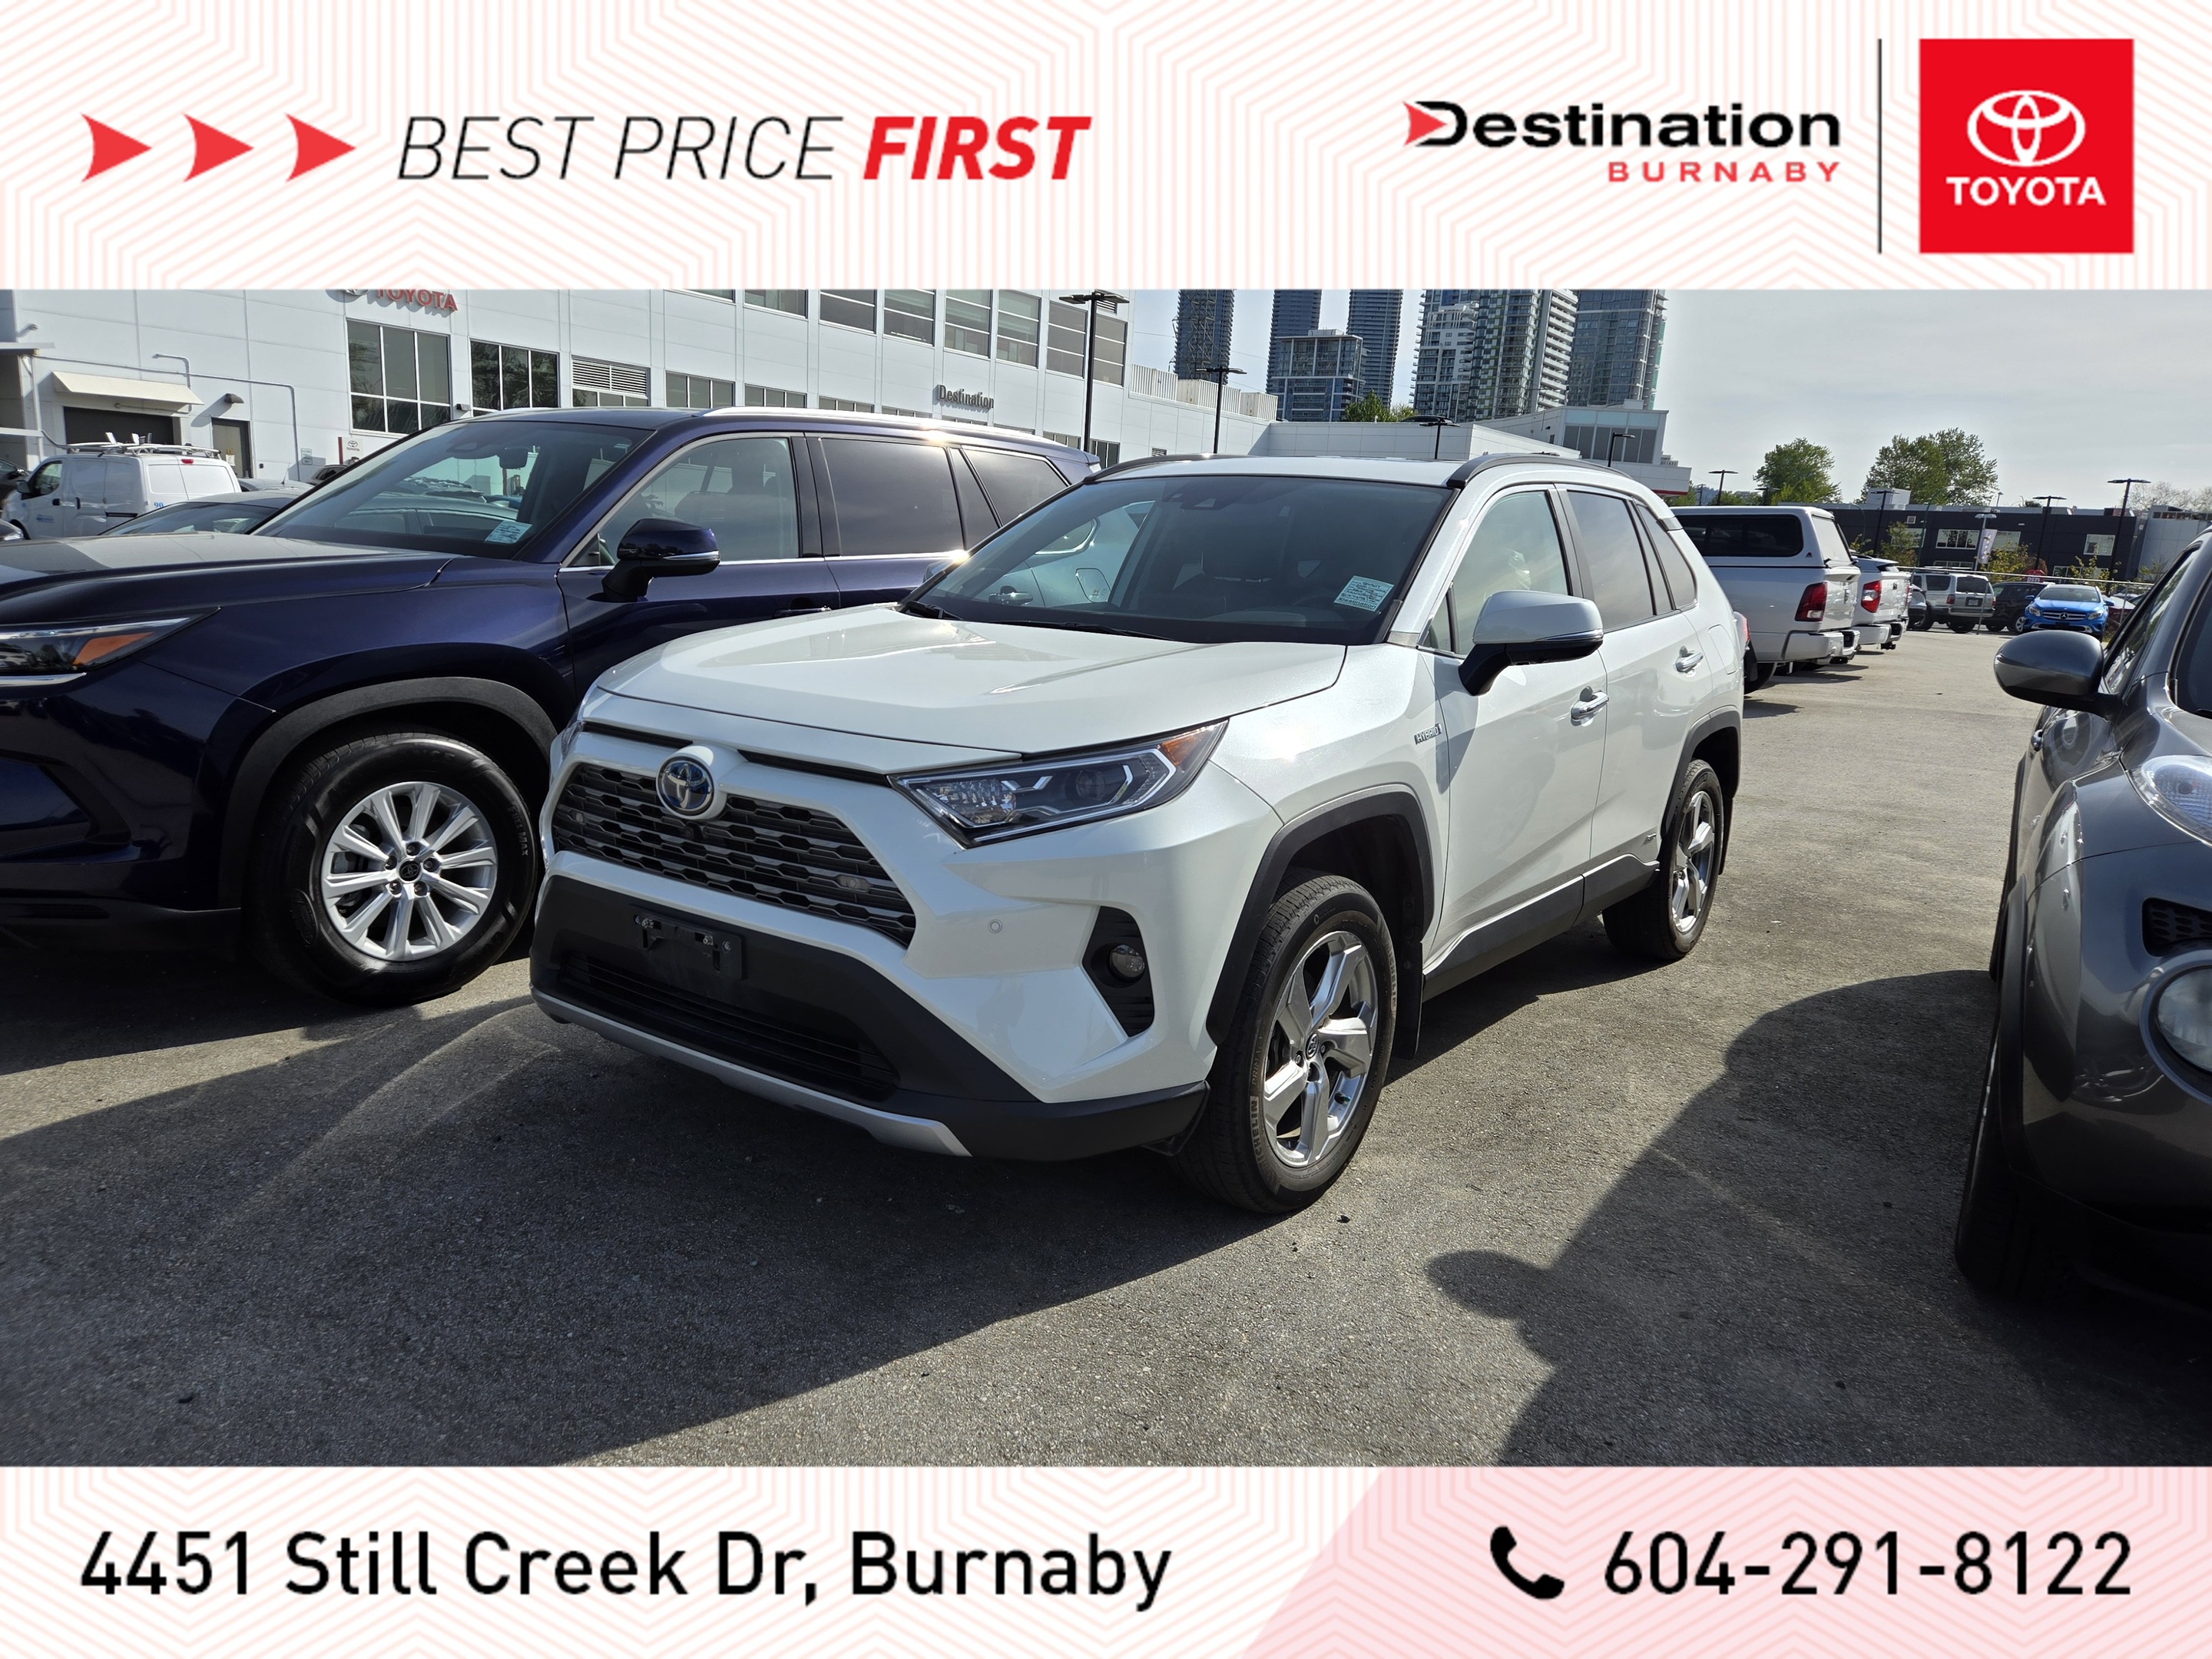 2021 Toyota RAV4 Hybrid Limited AWD - Local, One Owner, Fully Loaded!